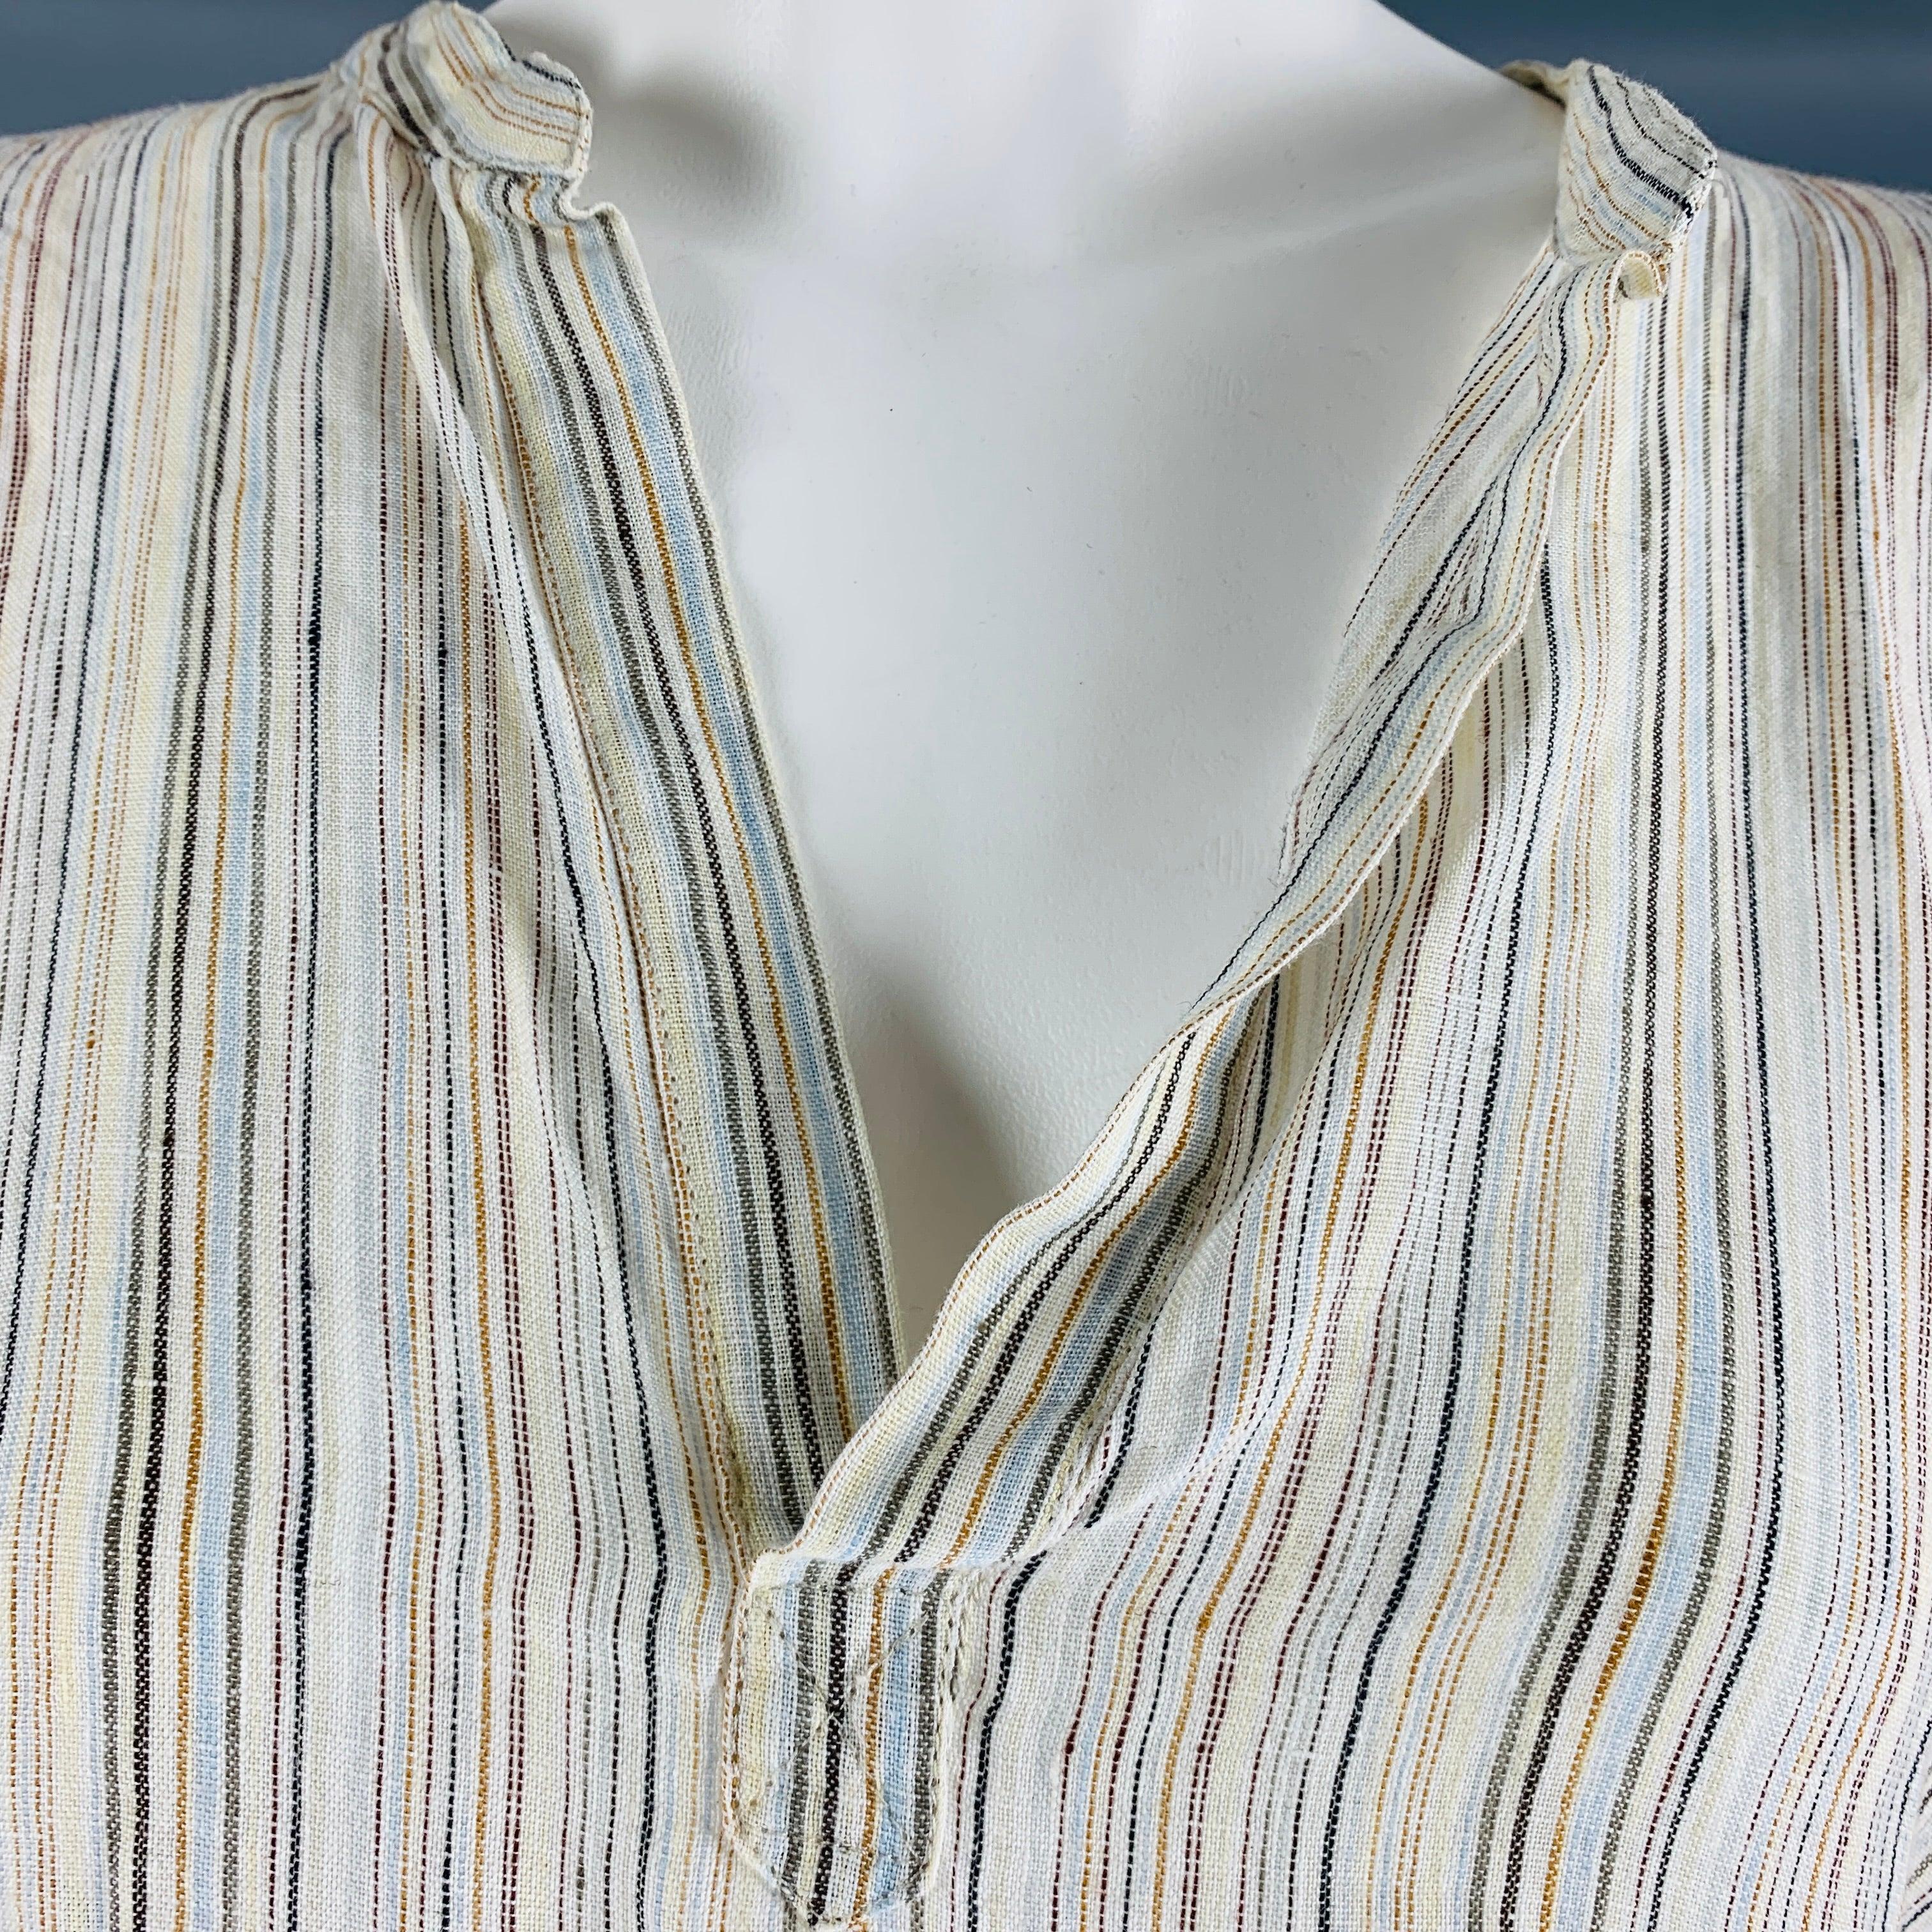 ESKANDAR blouse comes in white and blue linen woven material featuring a drop shoulder tunic design, v-neckline, and long sleeve. Made in England.Excellent Pre-Owned Condition. 

Marked:   0 

Measurements: 
 
Shoulder: 28 inches Bust: 56 inches